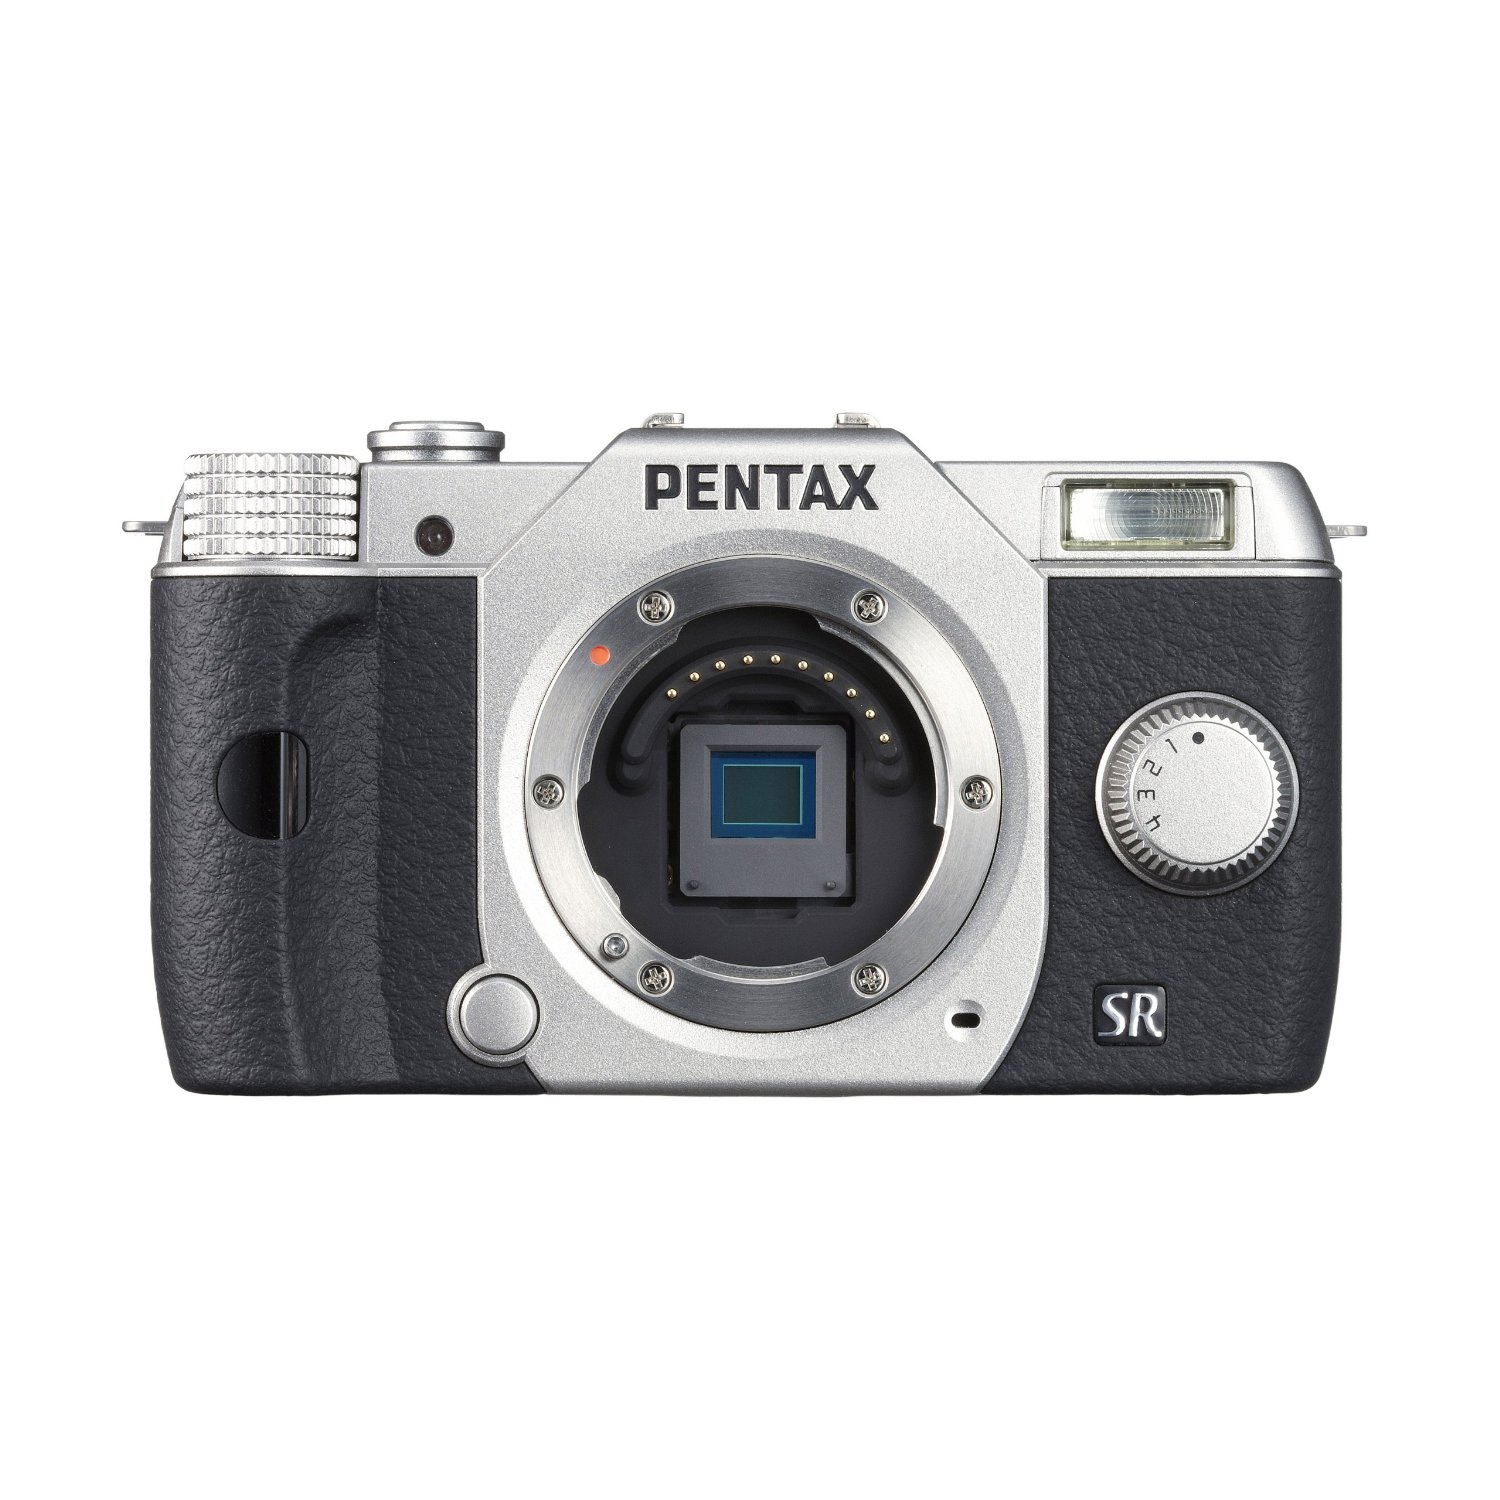 http://thetechjournal.com/wp-content/uploads/images/1210/1350236866-pentax-brings-q10-124mp-compact-camera-2.jpg